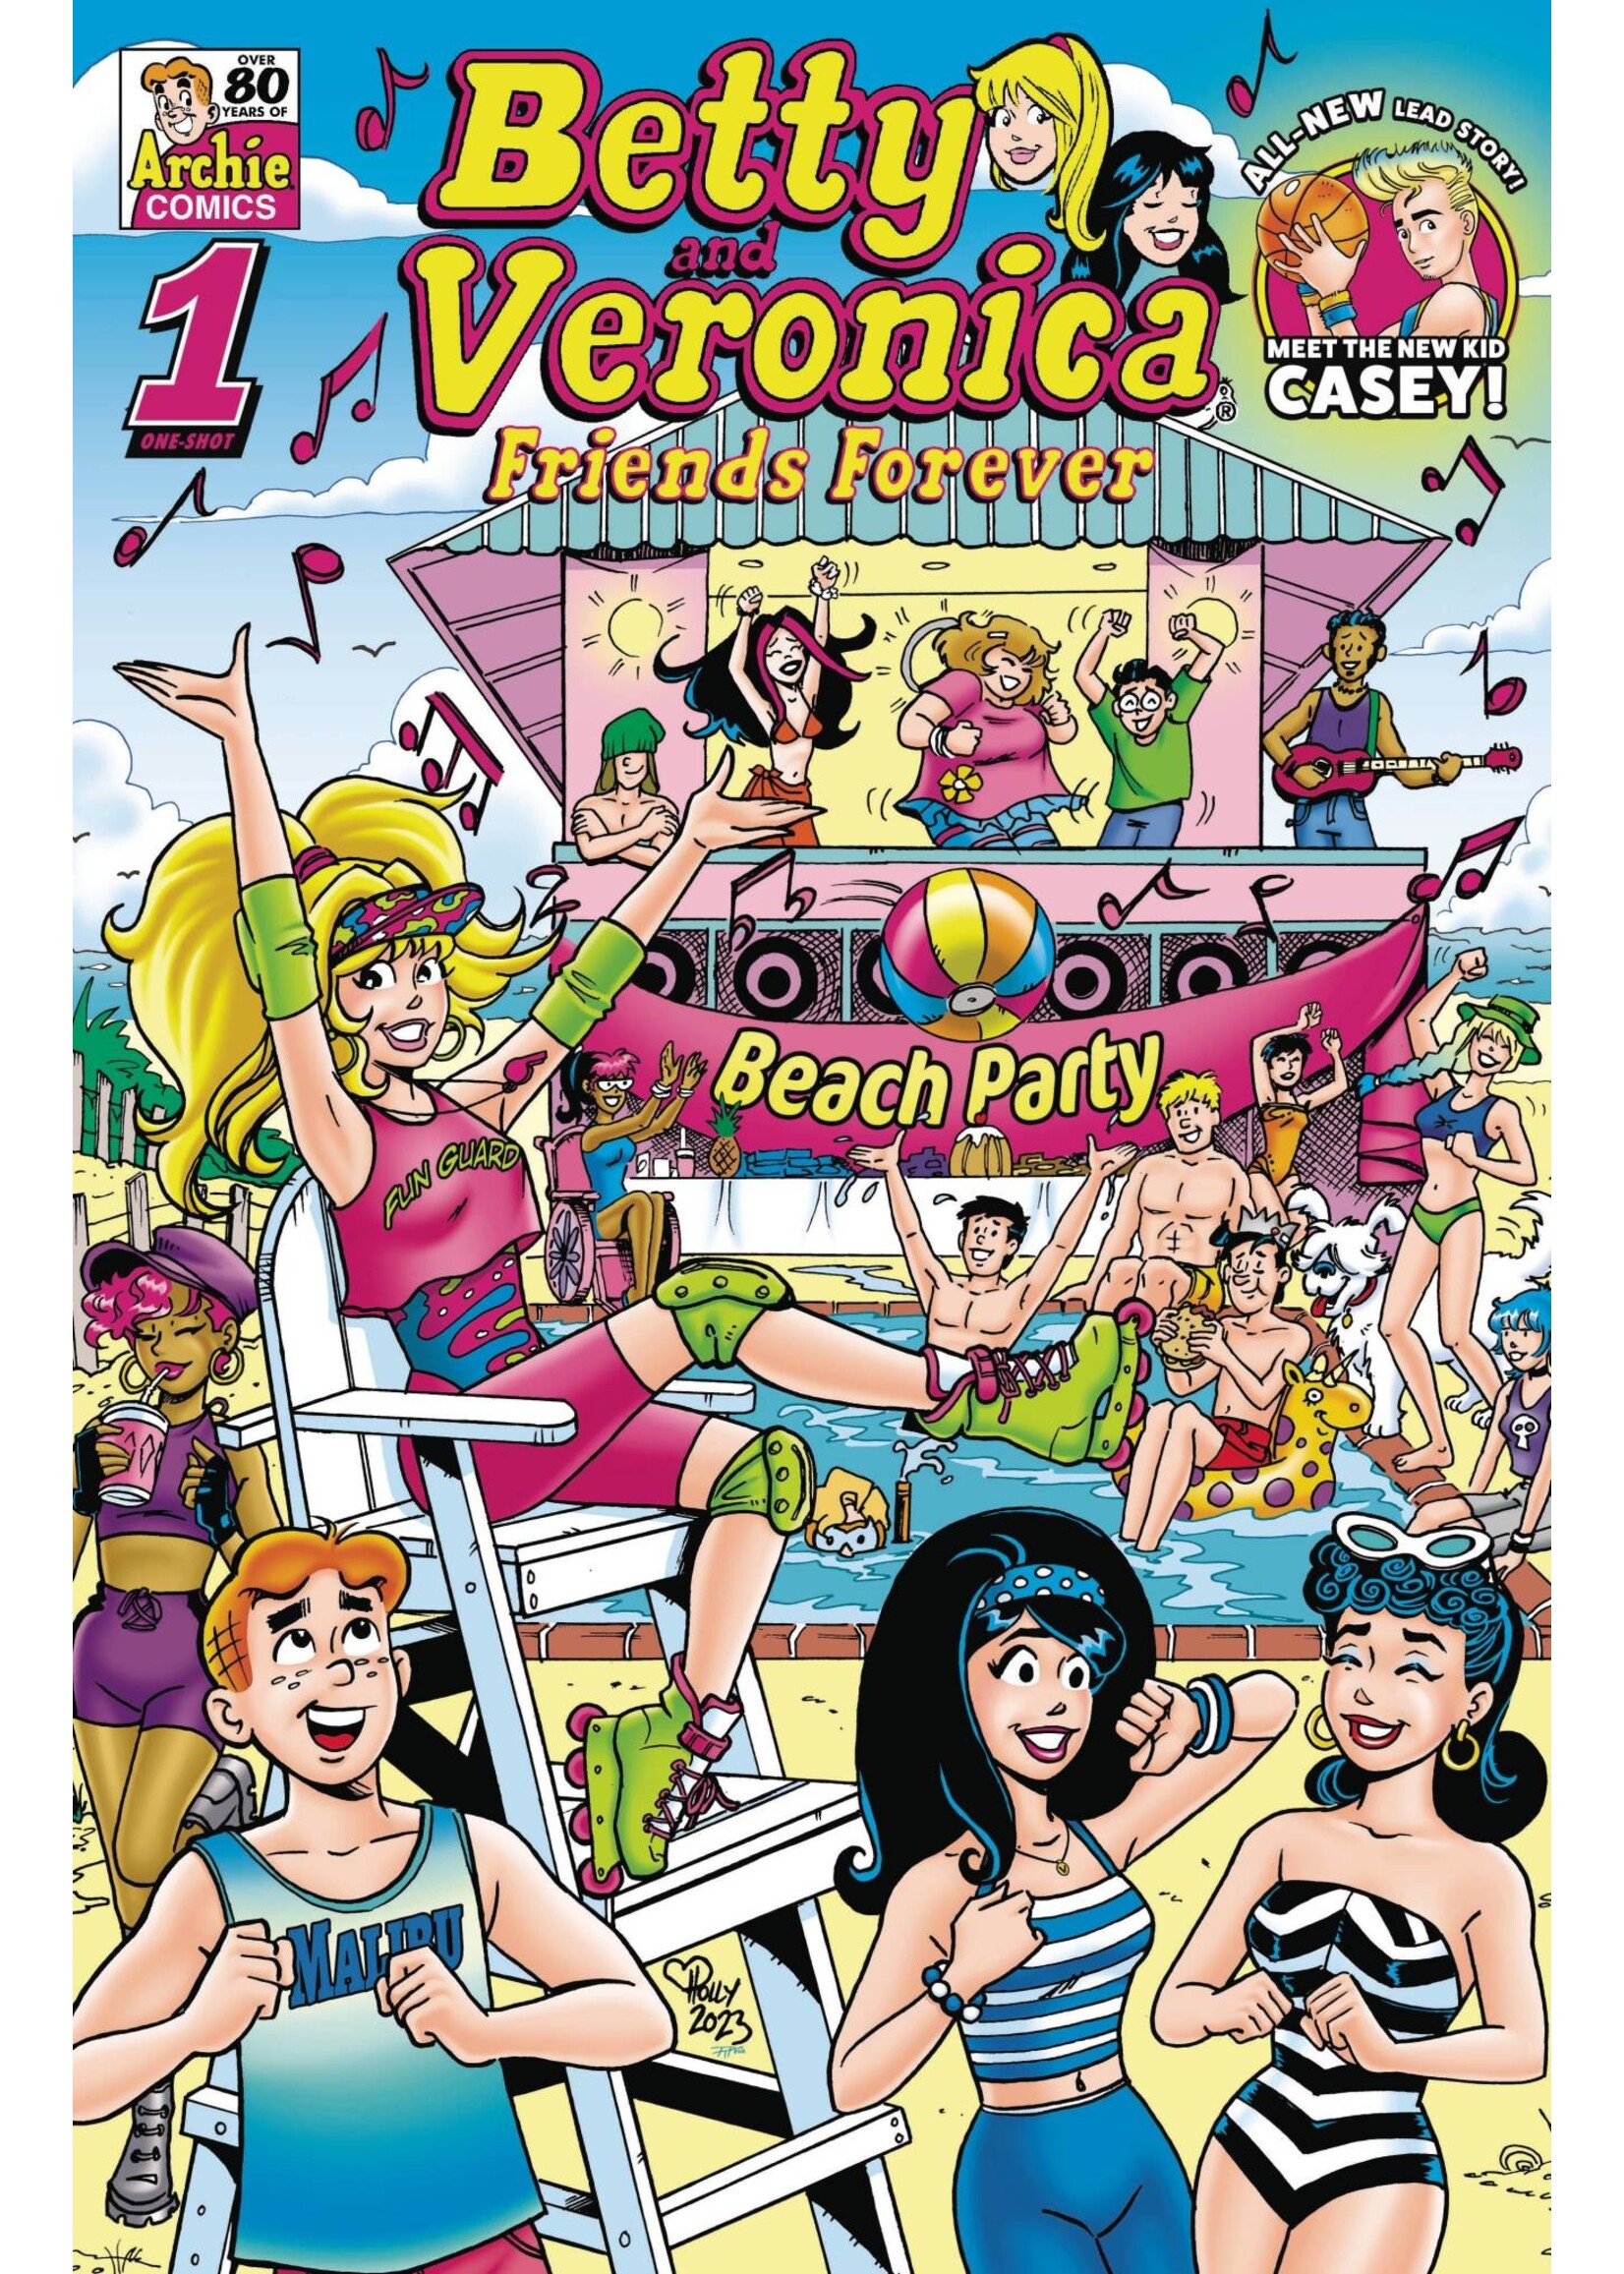 ARCHIE COMIC PUBLICATIONS B&V FRIENDS FOREVER BEACH PARTY ONESHOT